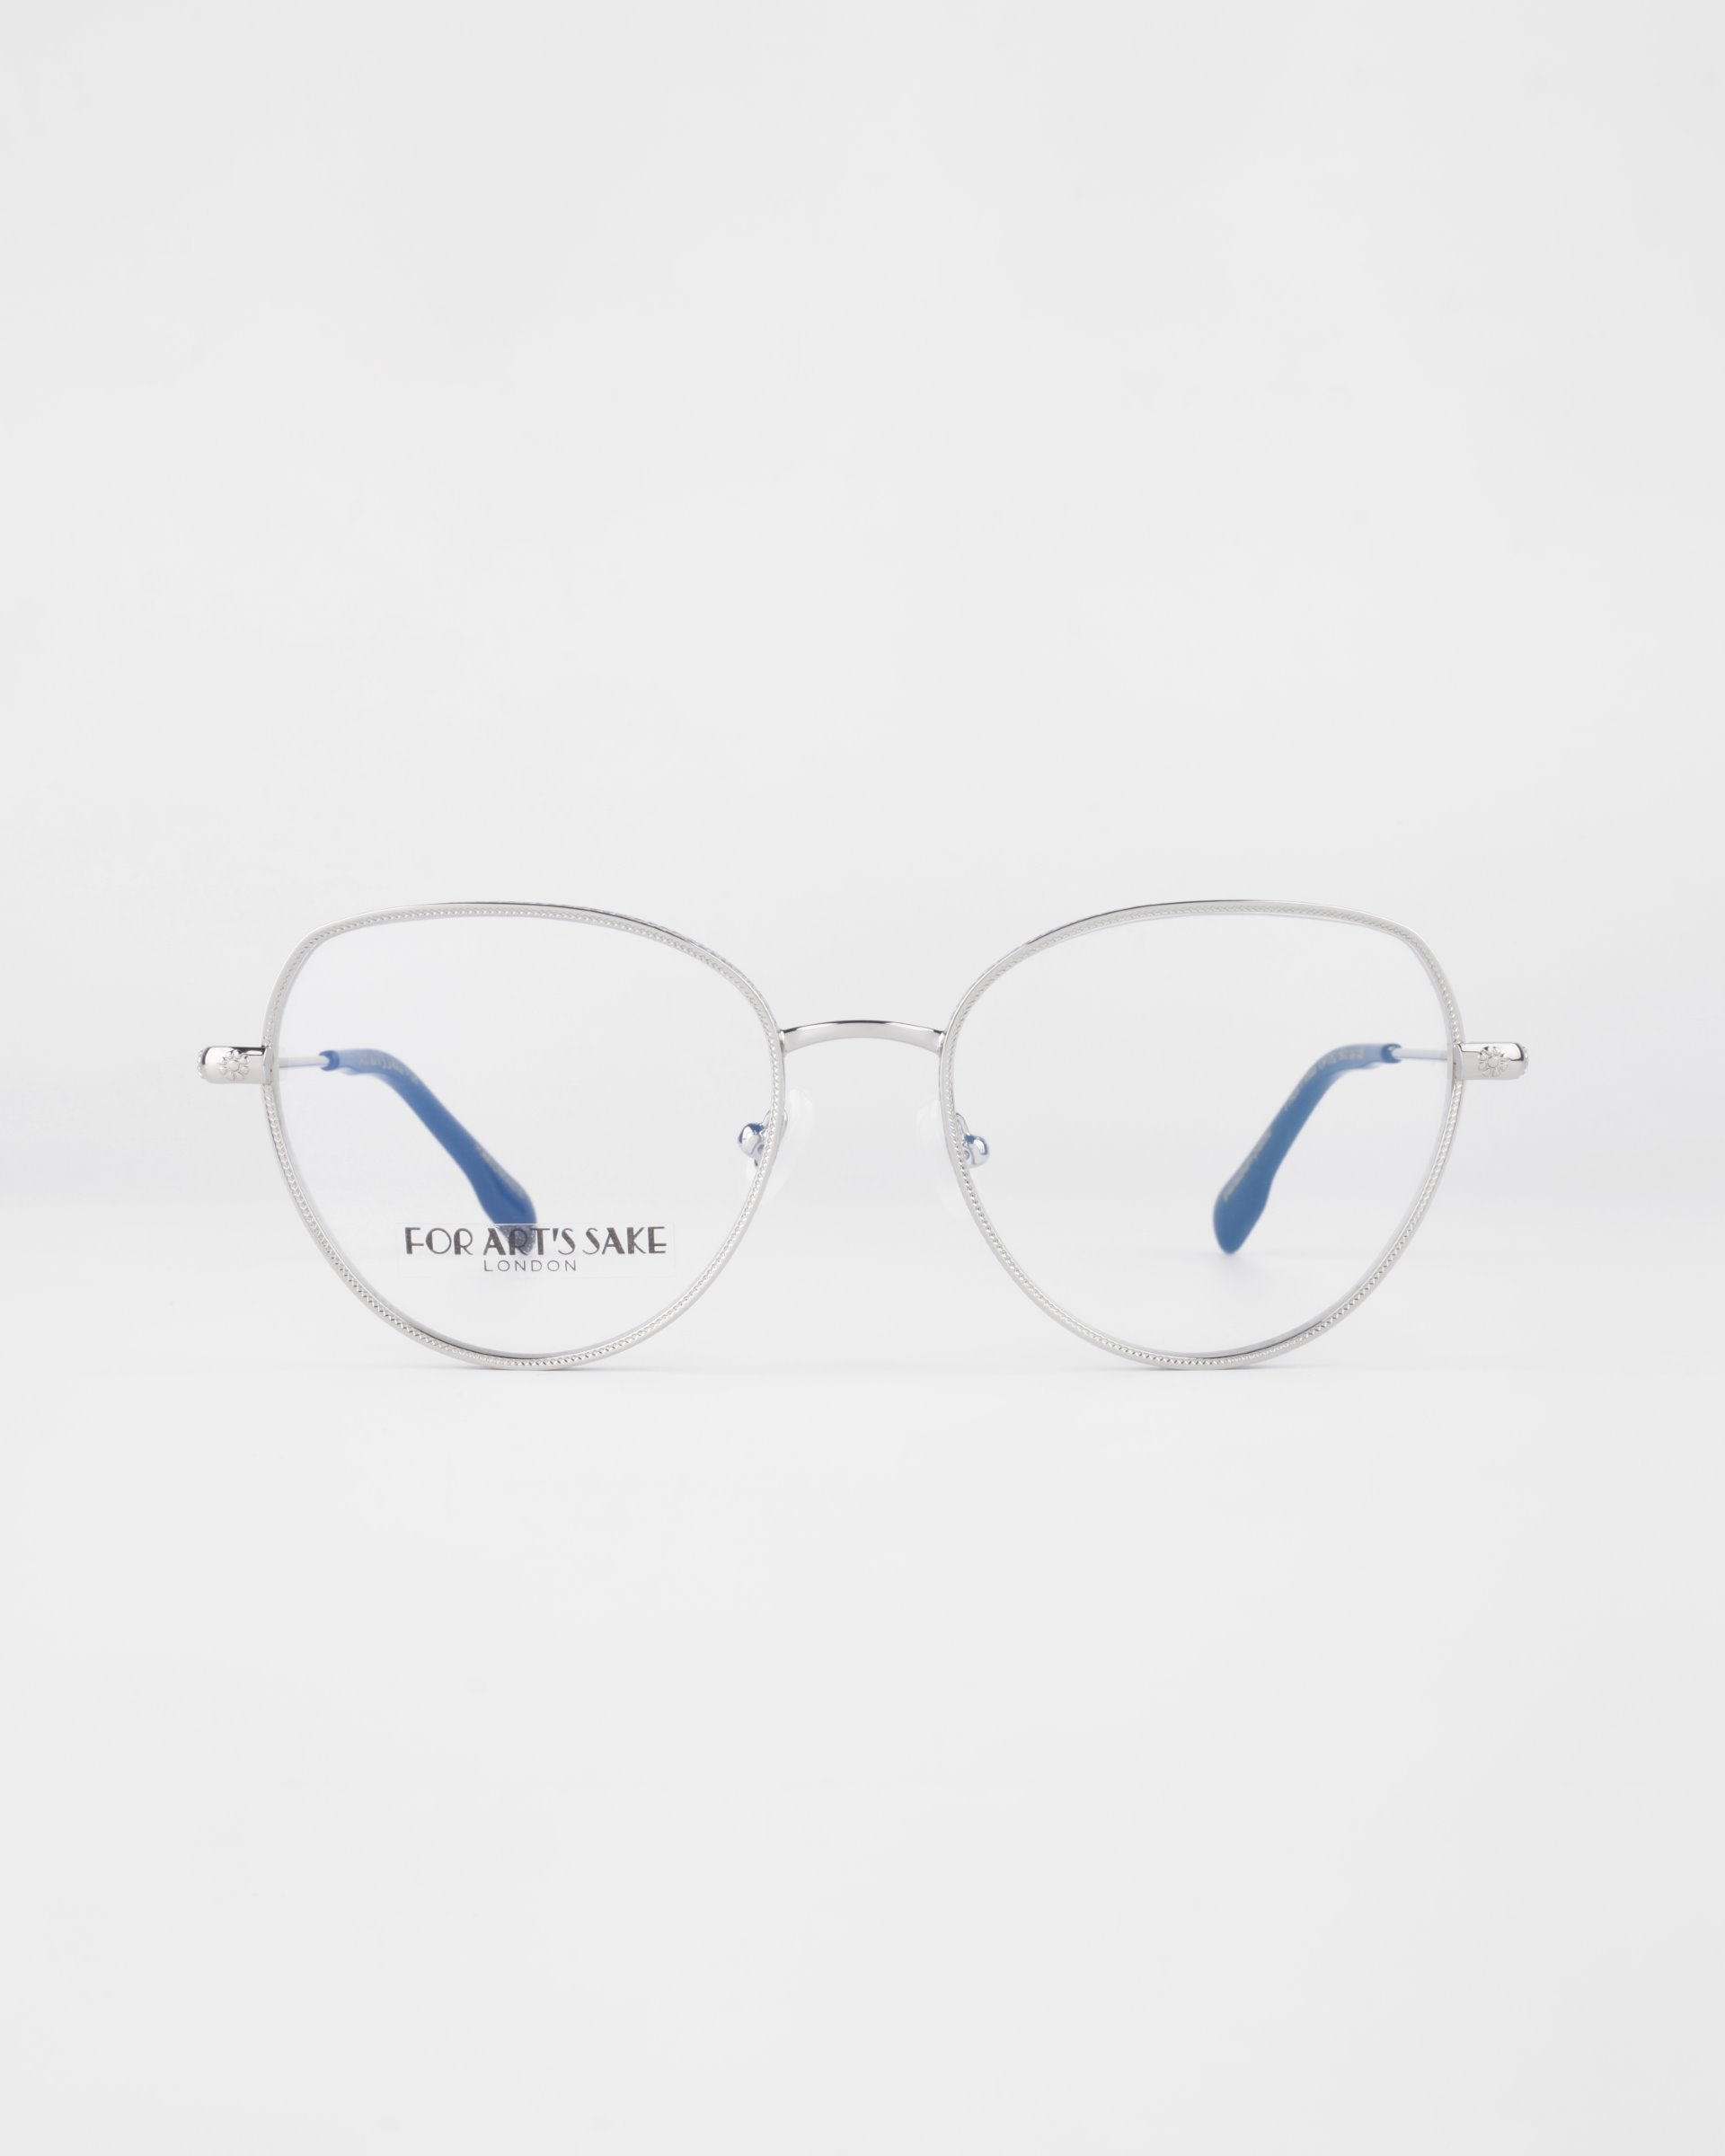 A pair of round, silver-framed Frida Floral eyeglasses with blue temple tips on a white background. The glasses feature thin metal frames and clear prescription lenses. The brand name "For Art's Sake®" is visible on the left lens.